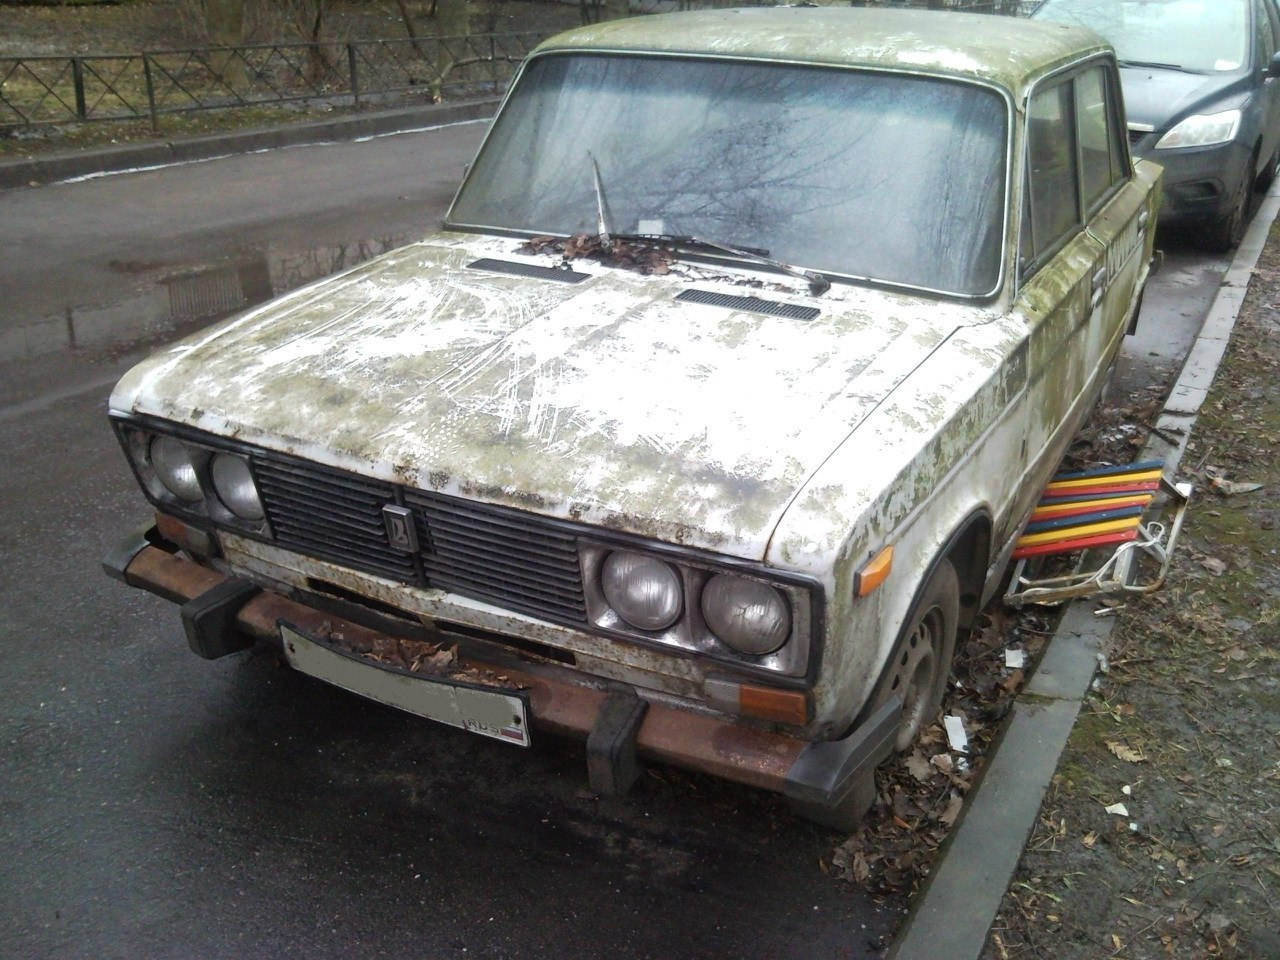 Seen life - the USSR, Made in USSR, Back to USSR, Abandoned, Car, Mold, Trash, Story, Longpost